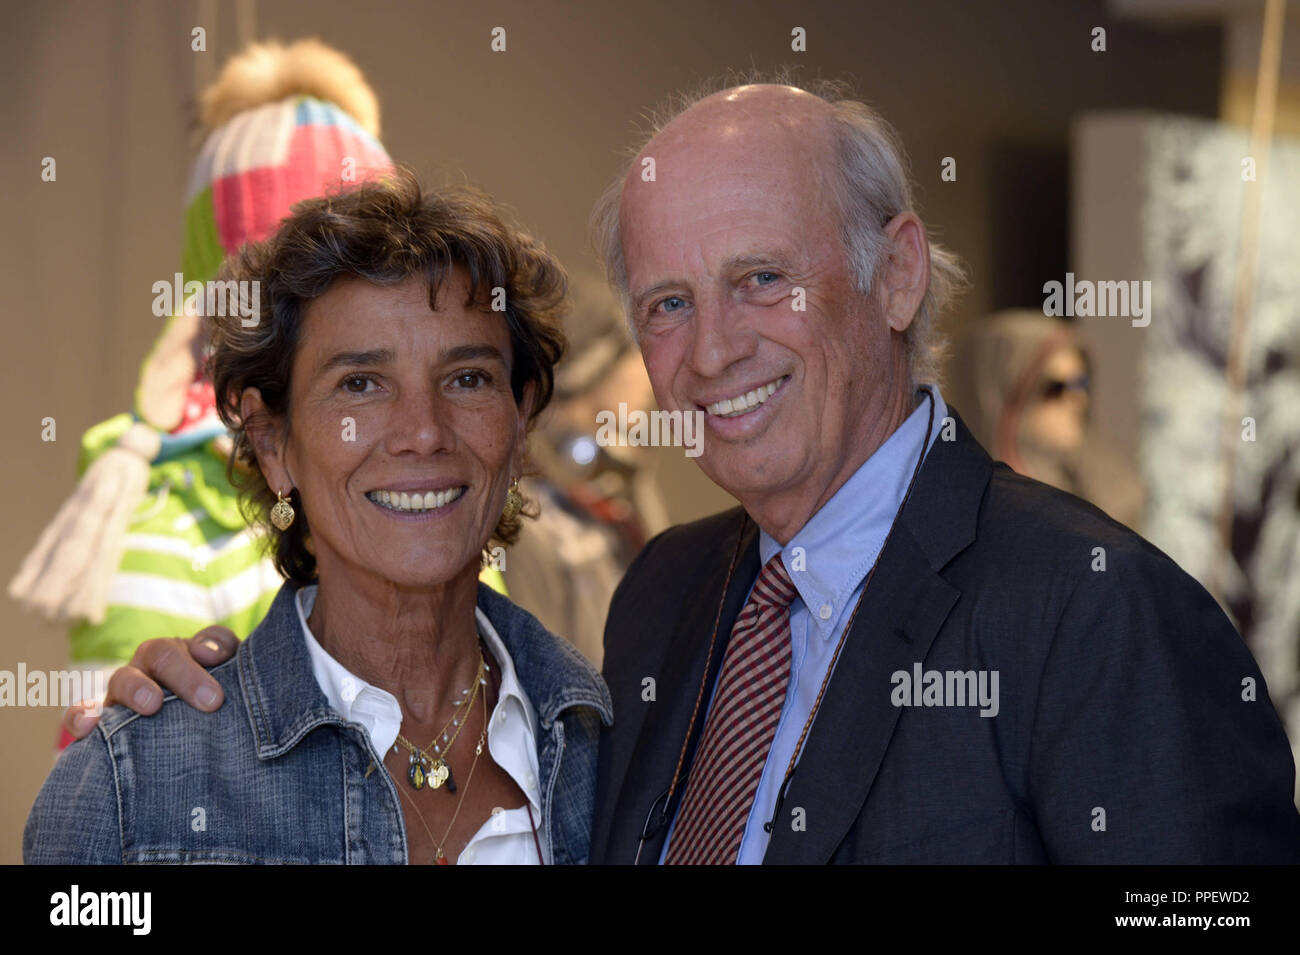 With willy bogner and wife sonia -Fotos und -Bildmaterial in hoher  Auflösung – Alamy